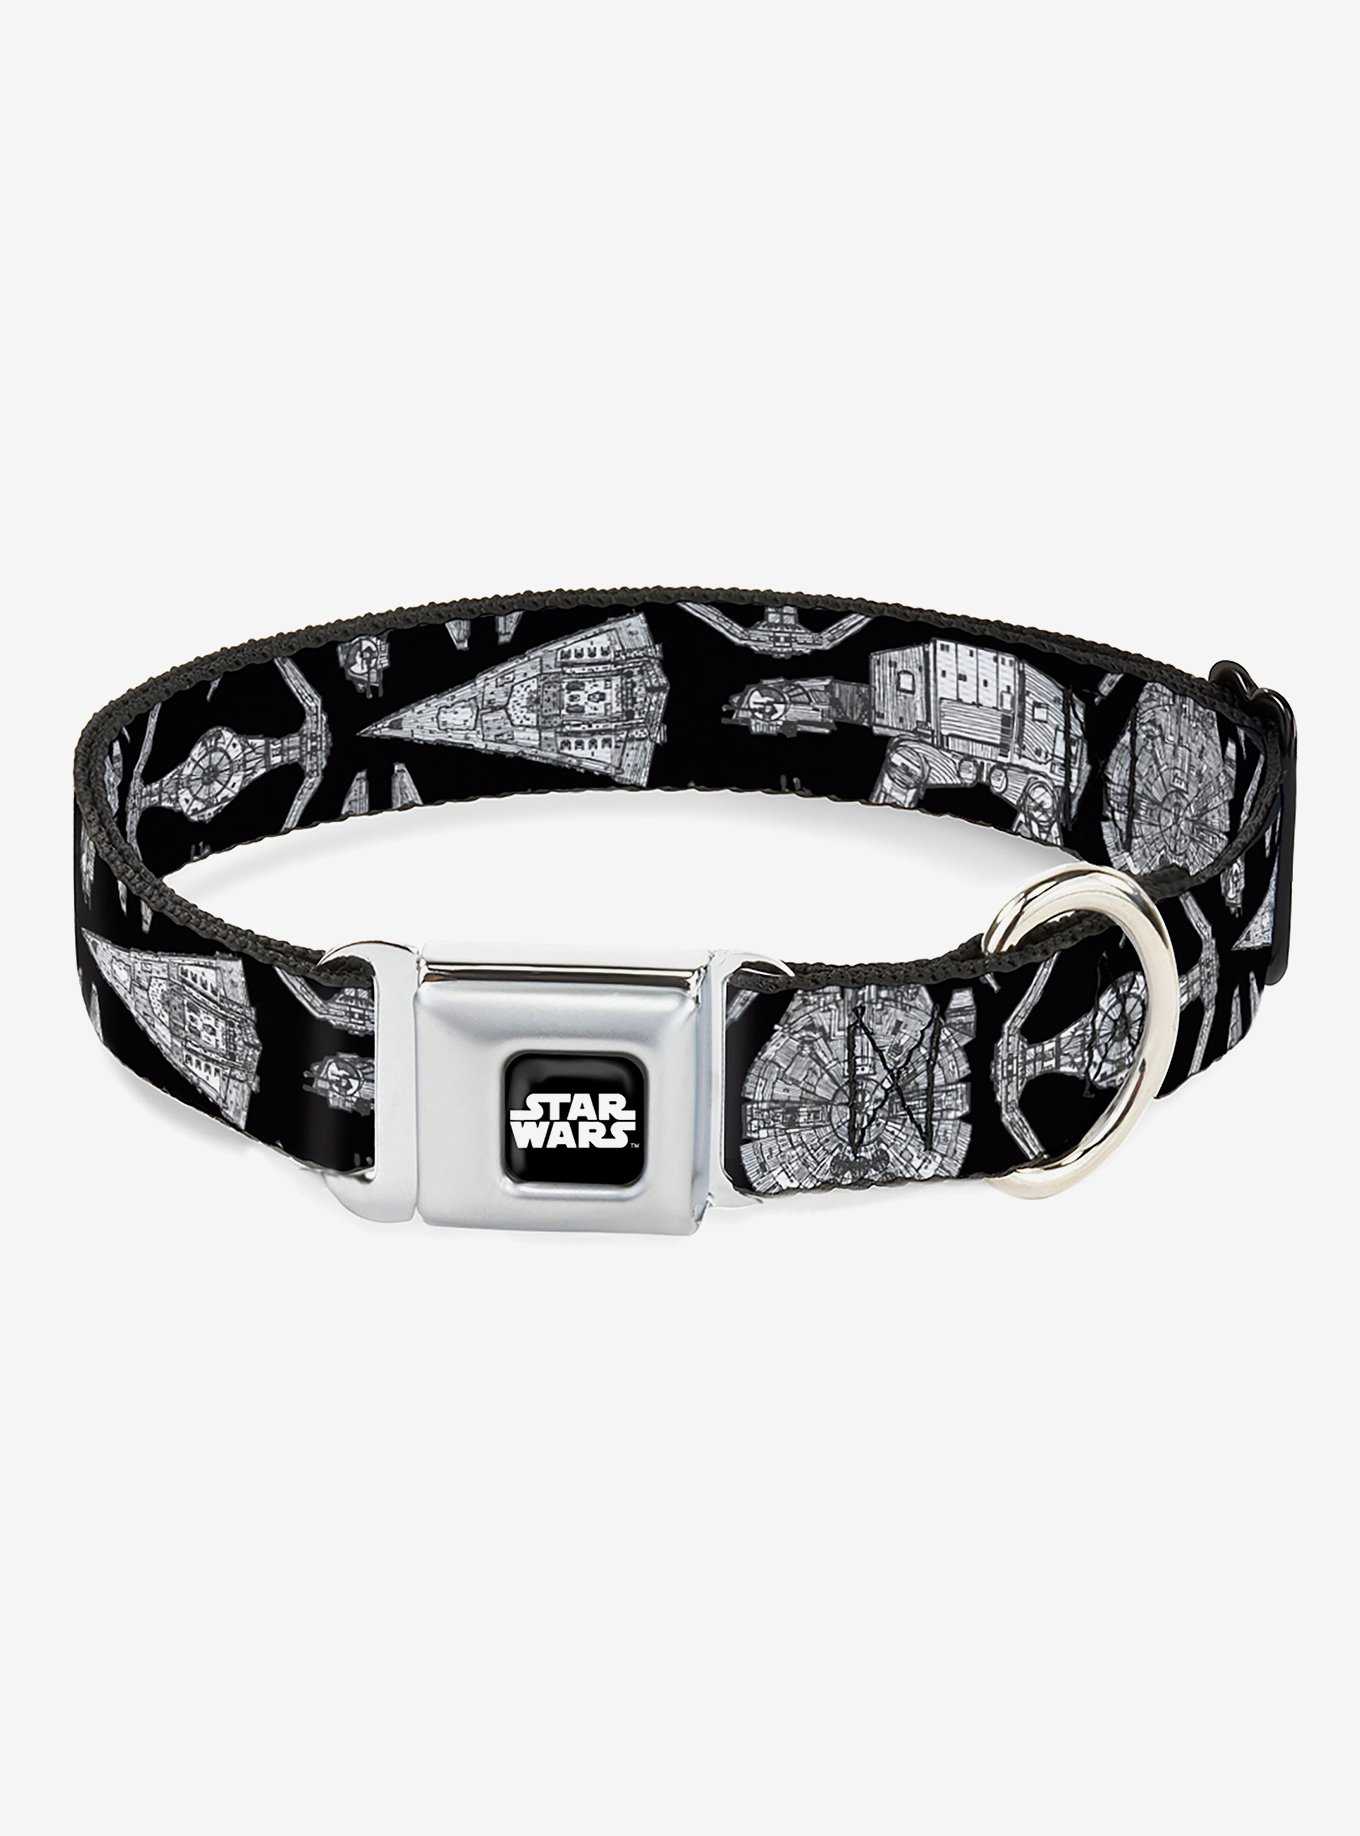 Star Wars Ships and Vehicles Seatbelt Buckle Dog Collar, , hi-res